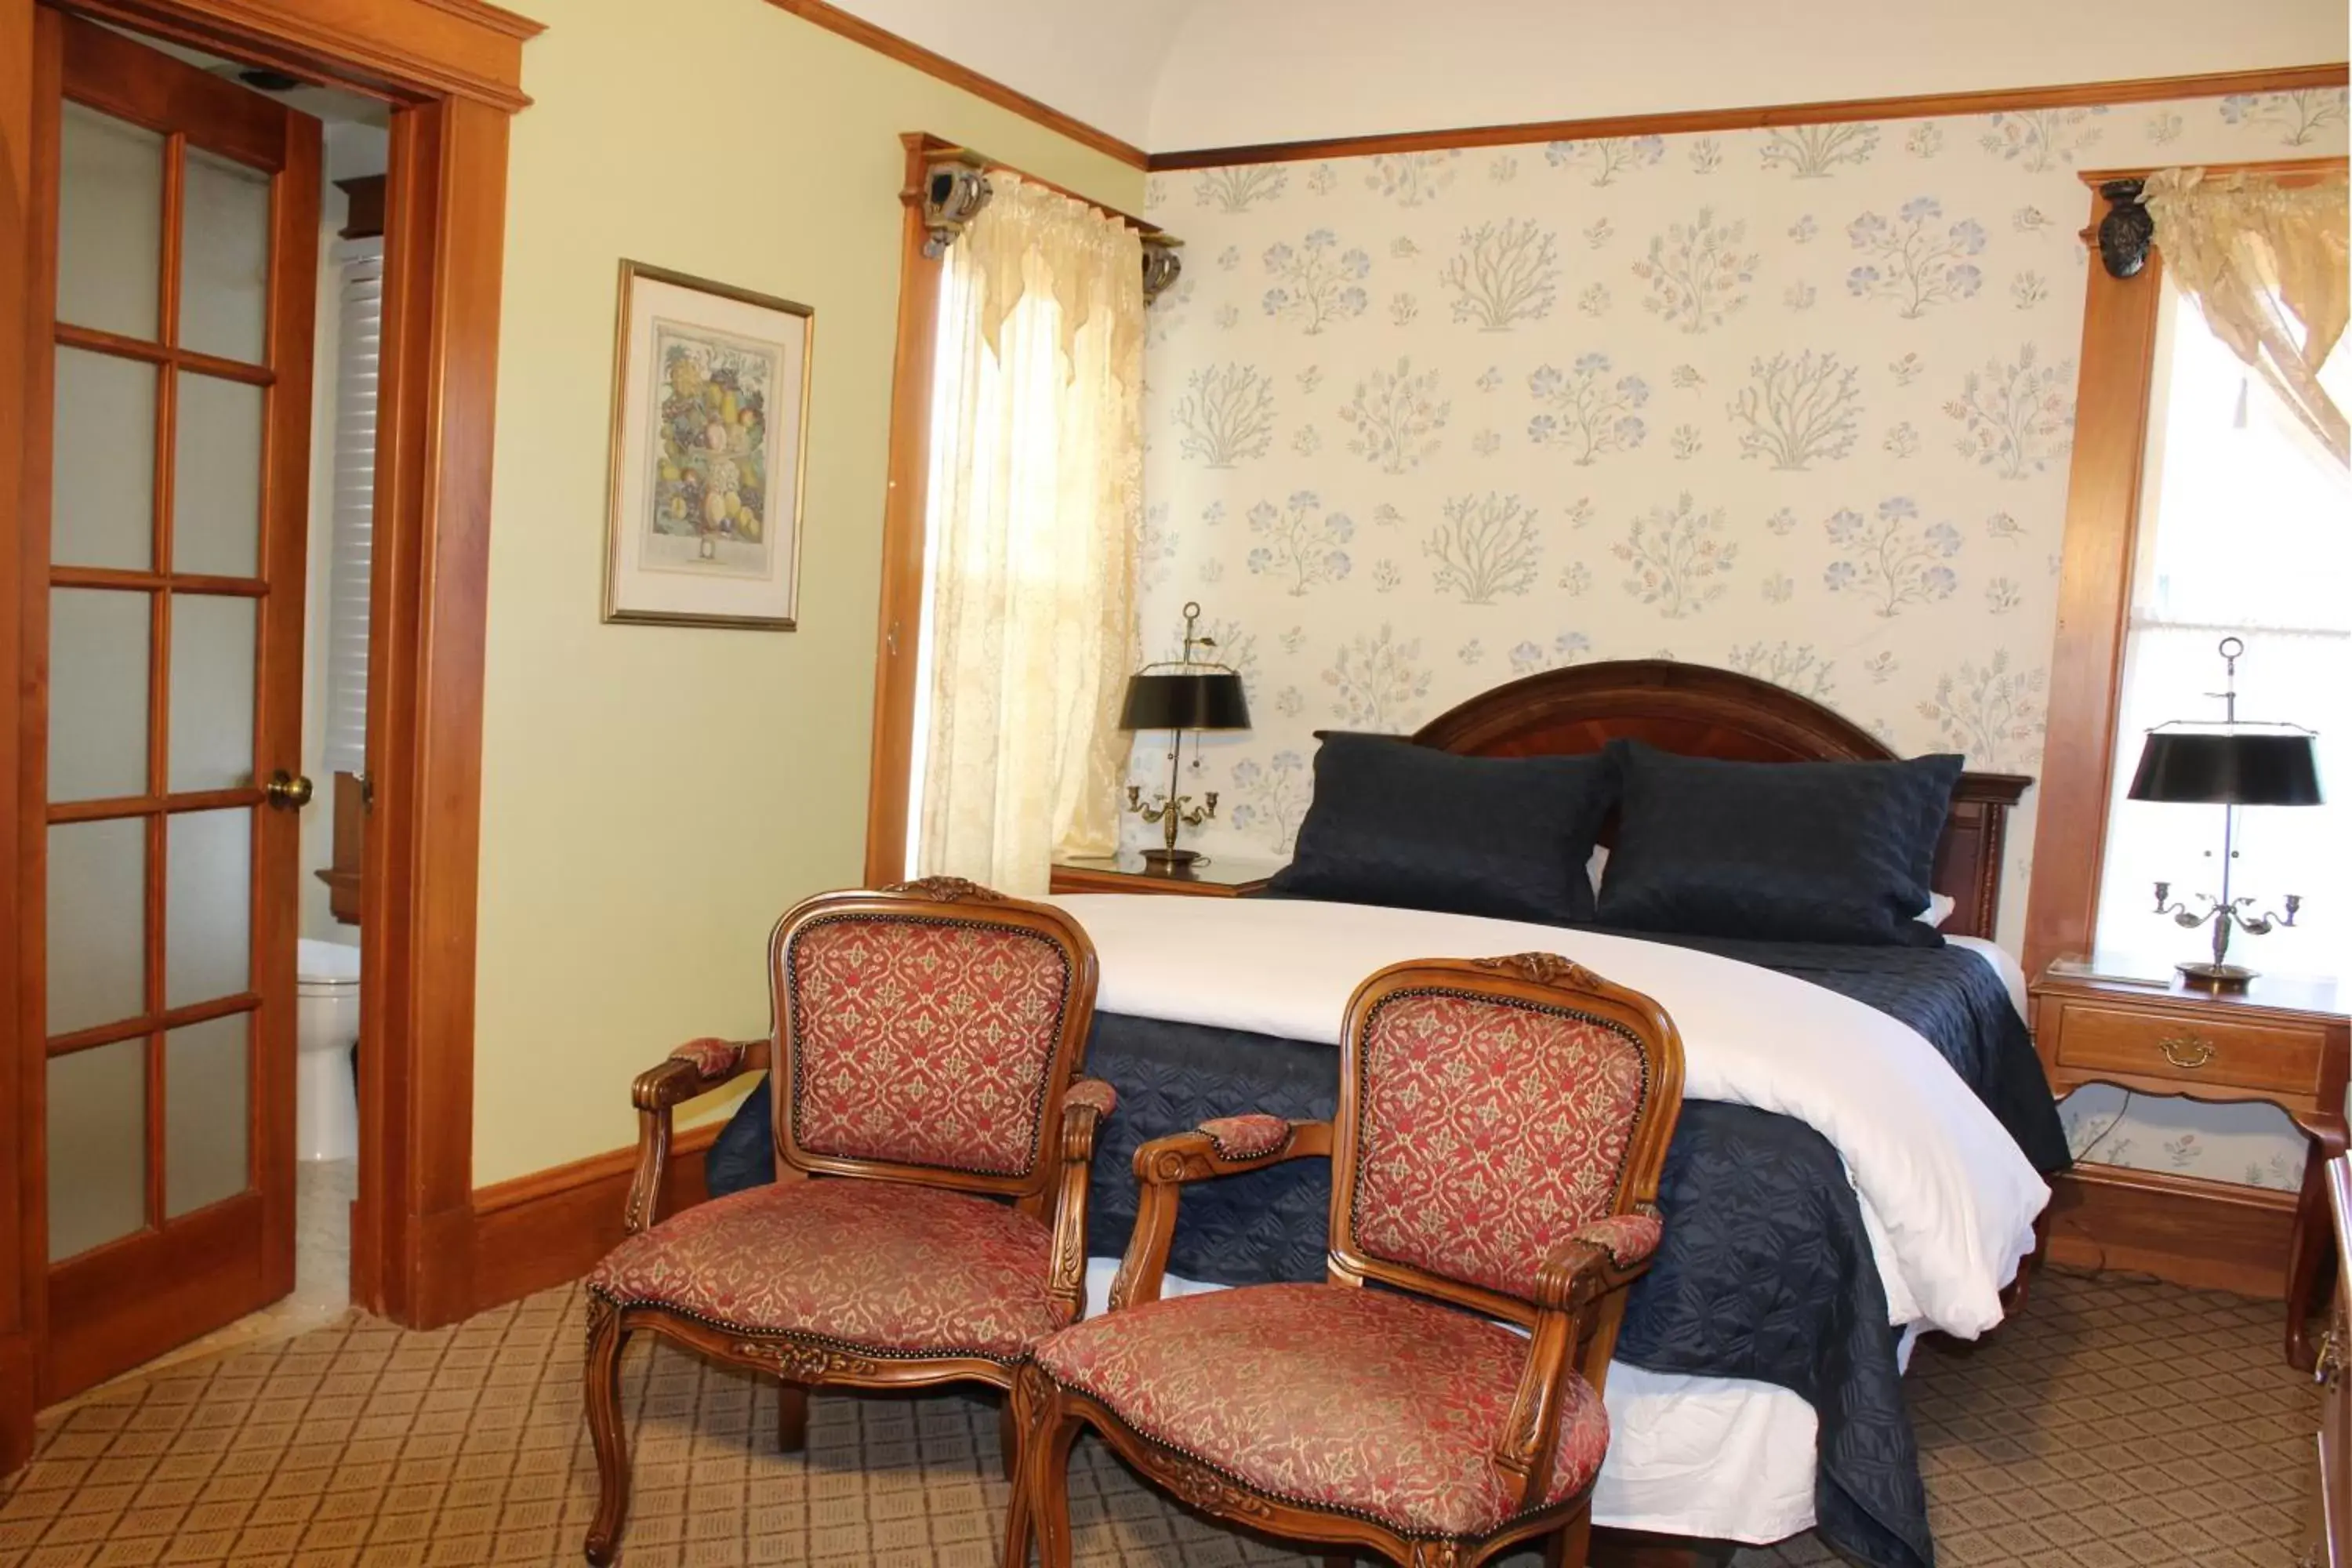 Bed in Pacific Grove Inn